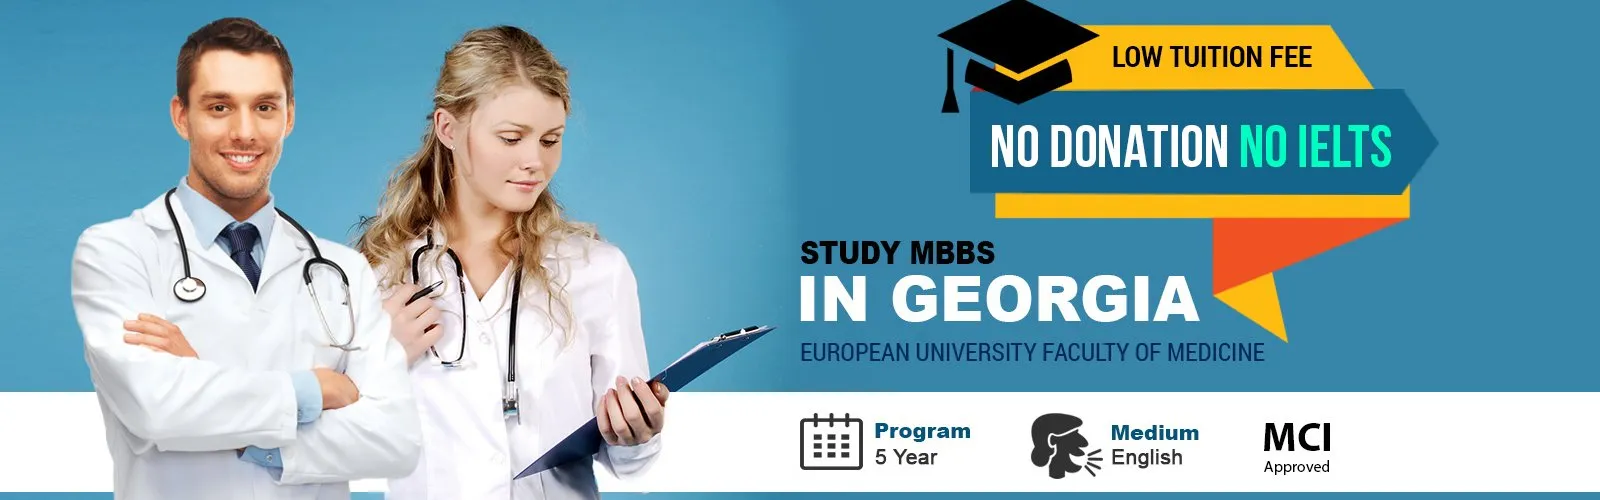 mbbs in georgia at low cost.